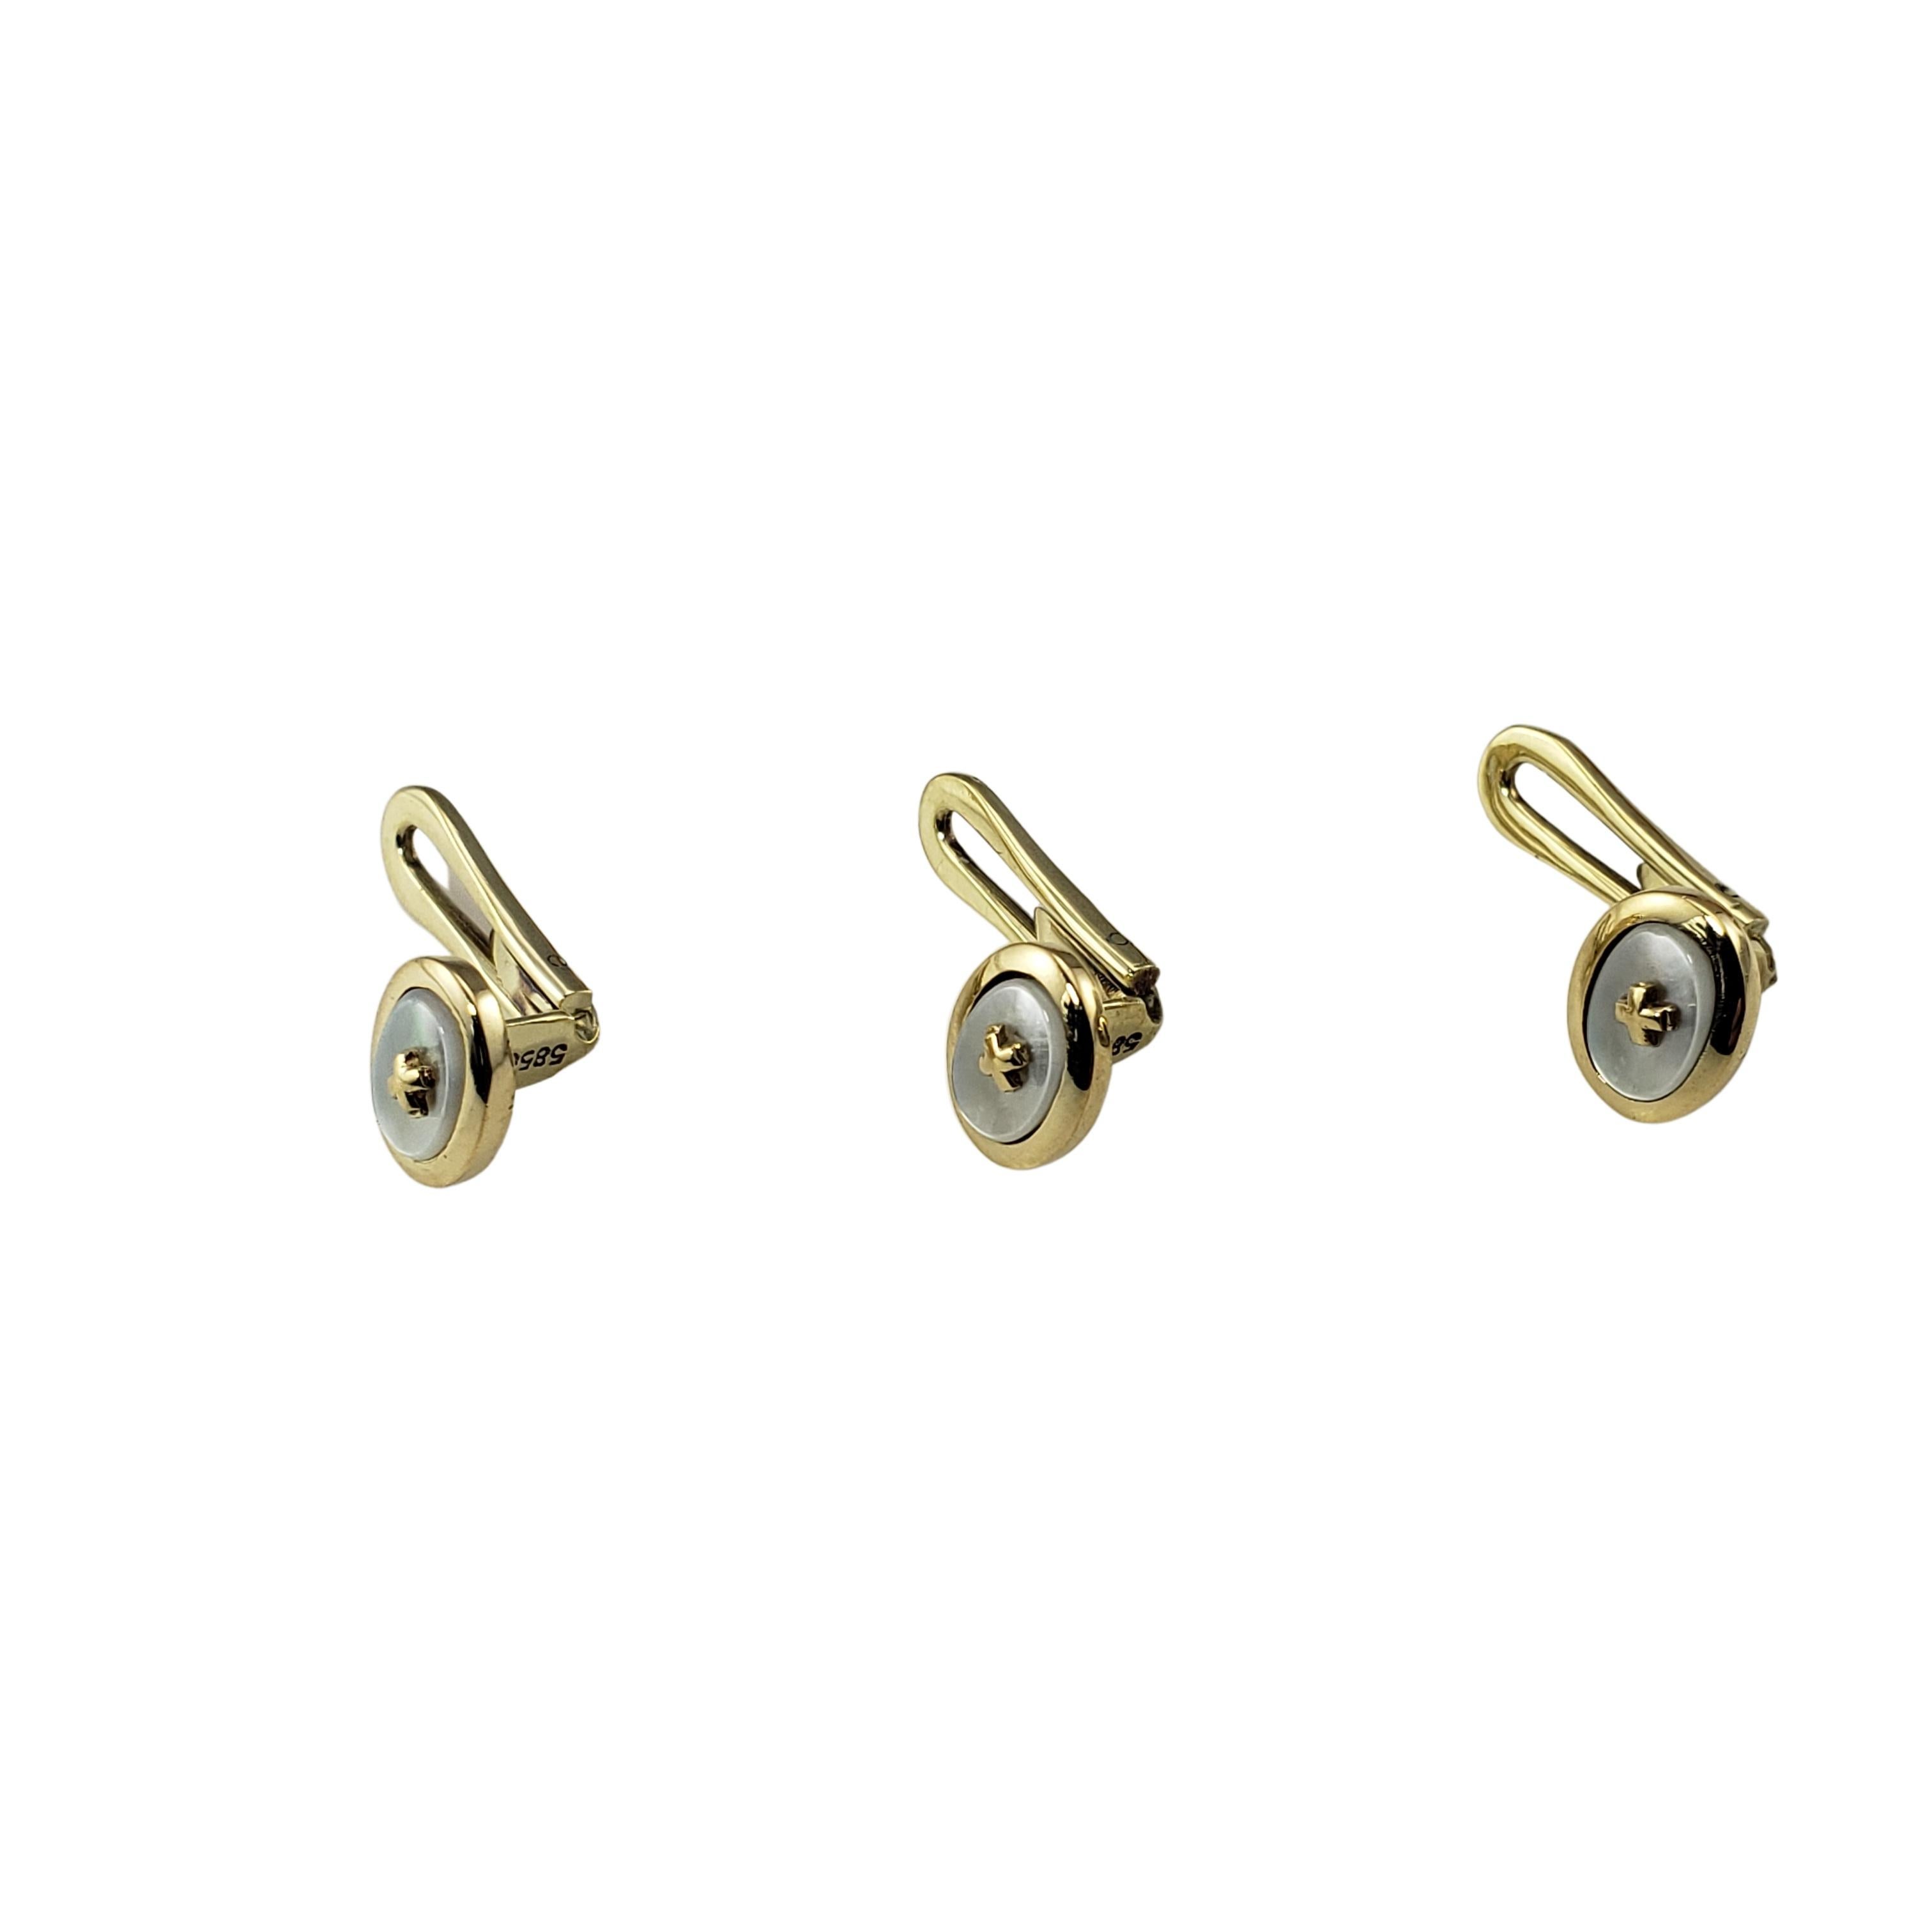 Vintage 14 Karat Yellow Gold and Mother of Pearl Buttons-

This elegant set of three buttons are crafted in beautifully detailed 14K yellow gold and mother of pearl.

Matching cufflinks: RL-00010249

Size: 8 mm x 7 mm

Weight: 3.7 dwt. / 5.8